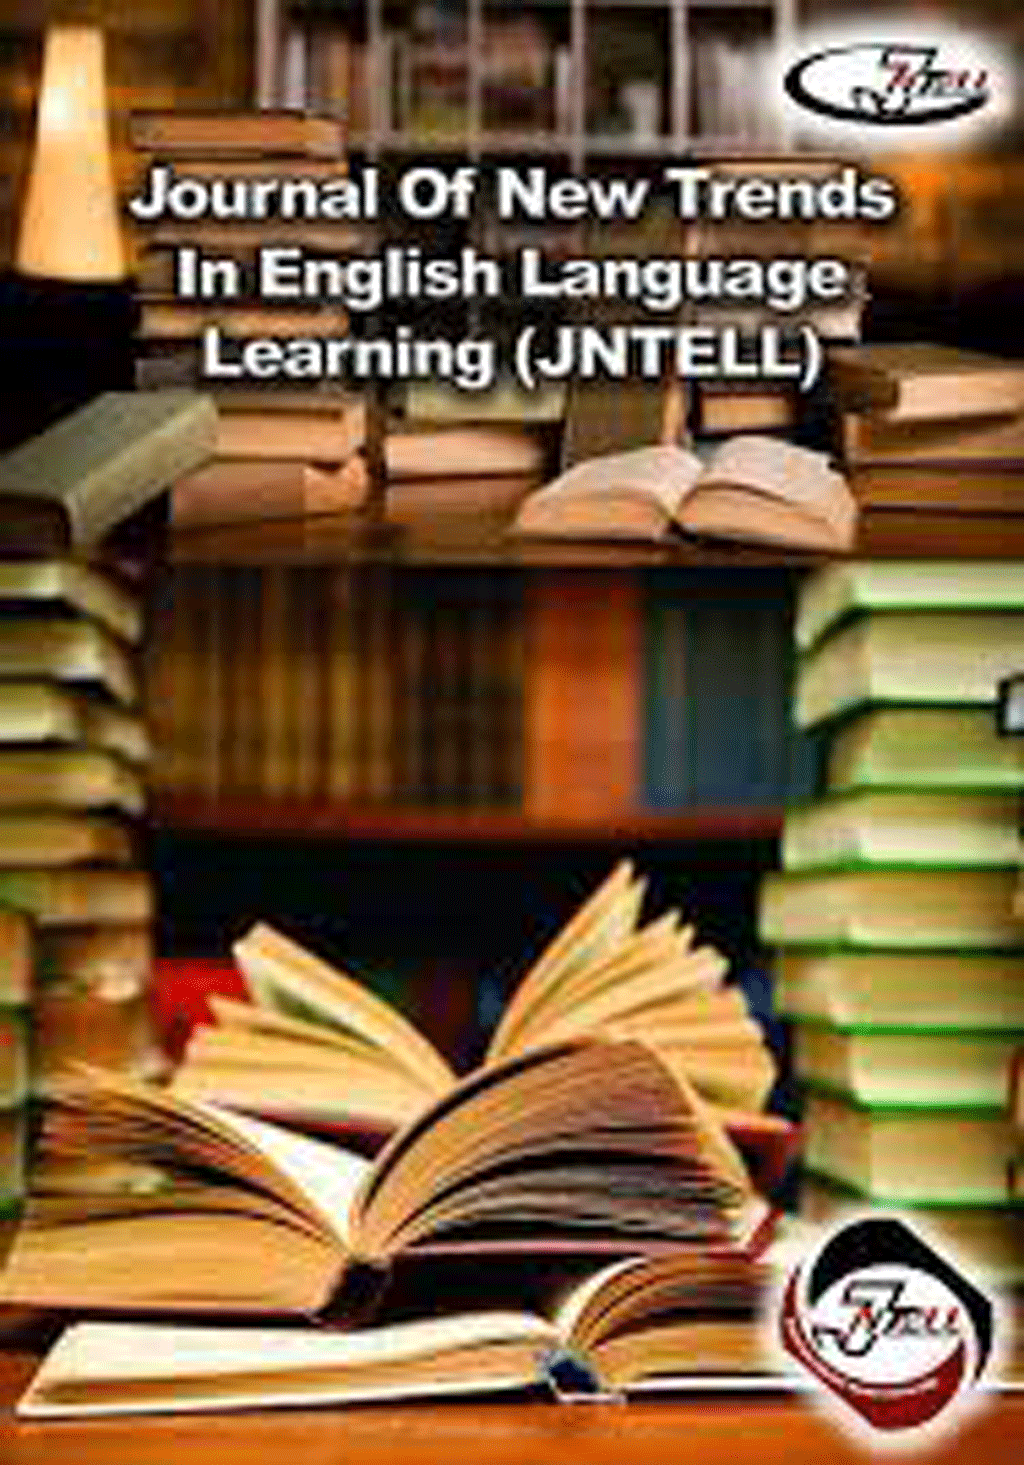 Journal of New Trends in English Language Learning - Spring 2022, Volume 1 - Number 1